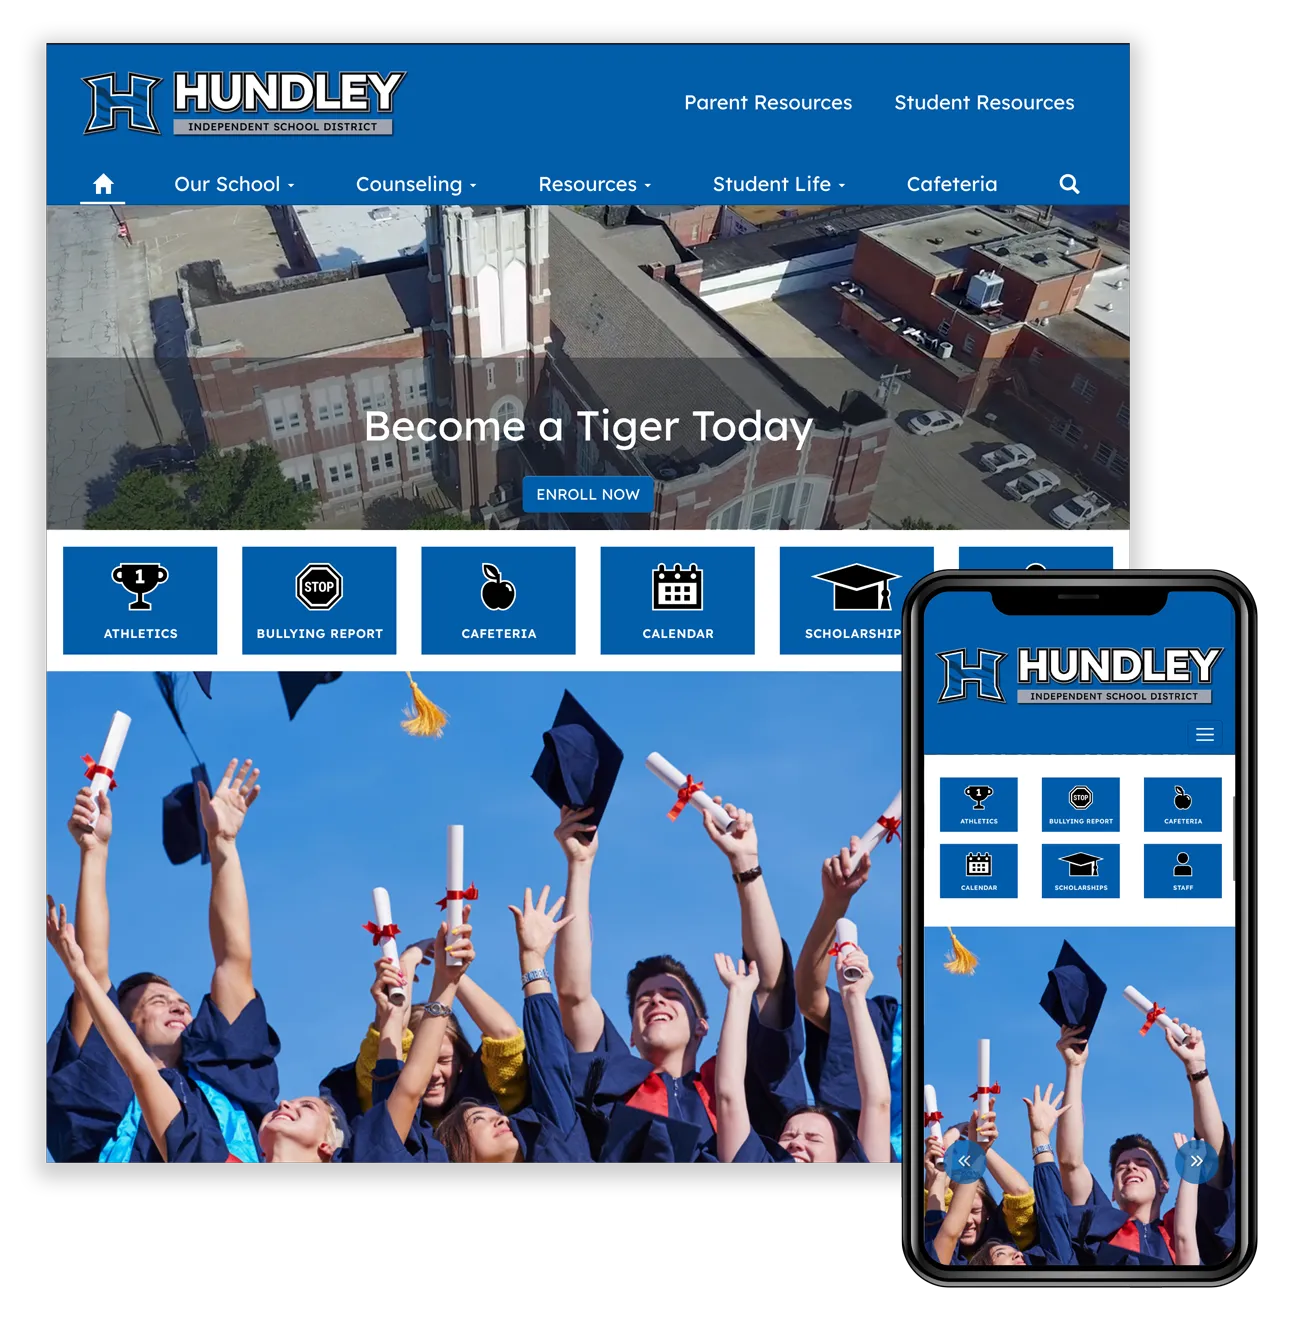 Hundley ISD example Smart Site on web and mobile